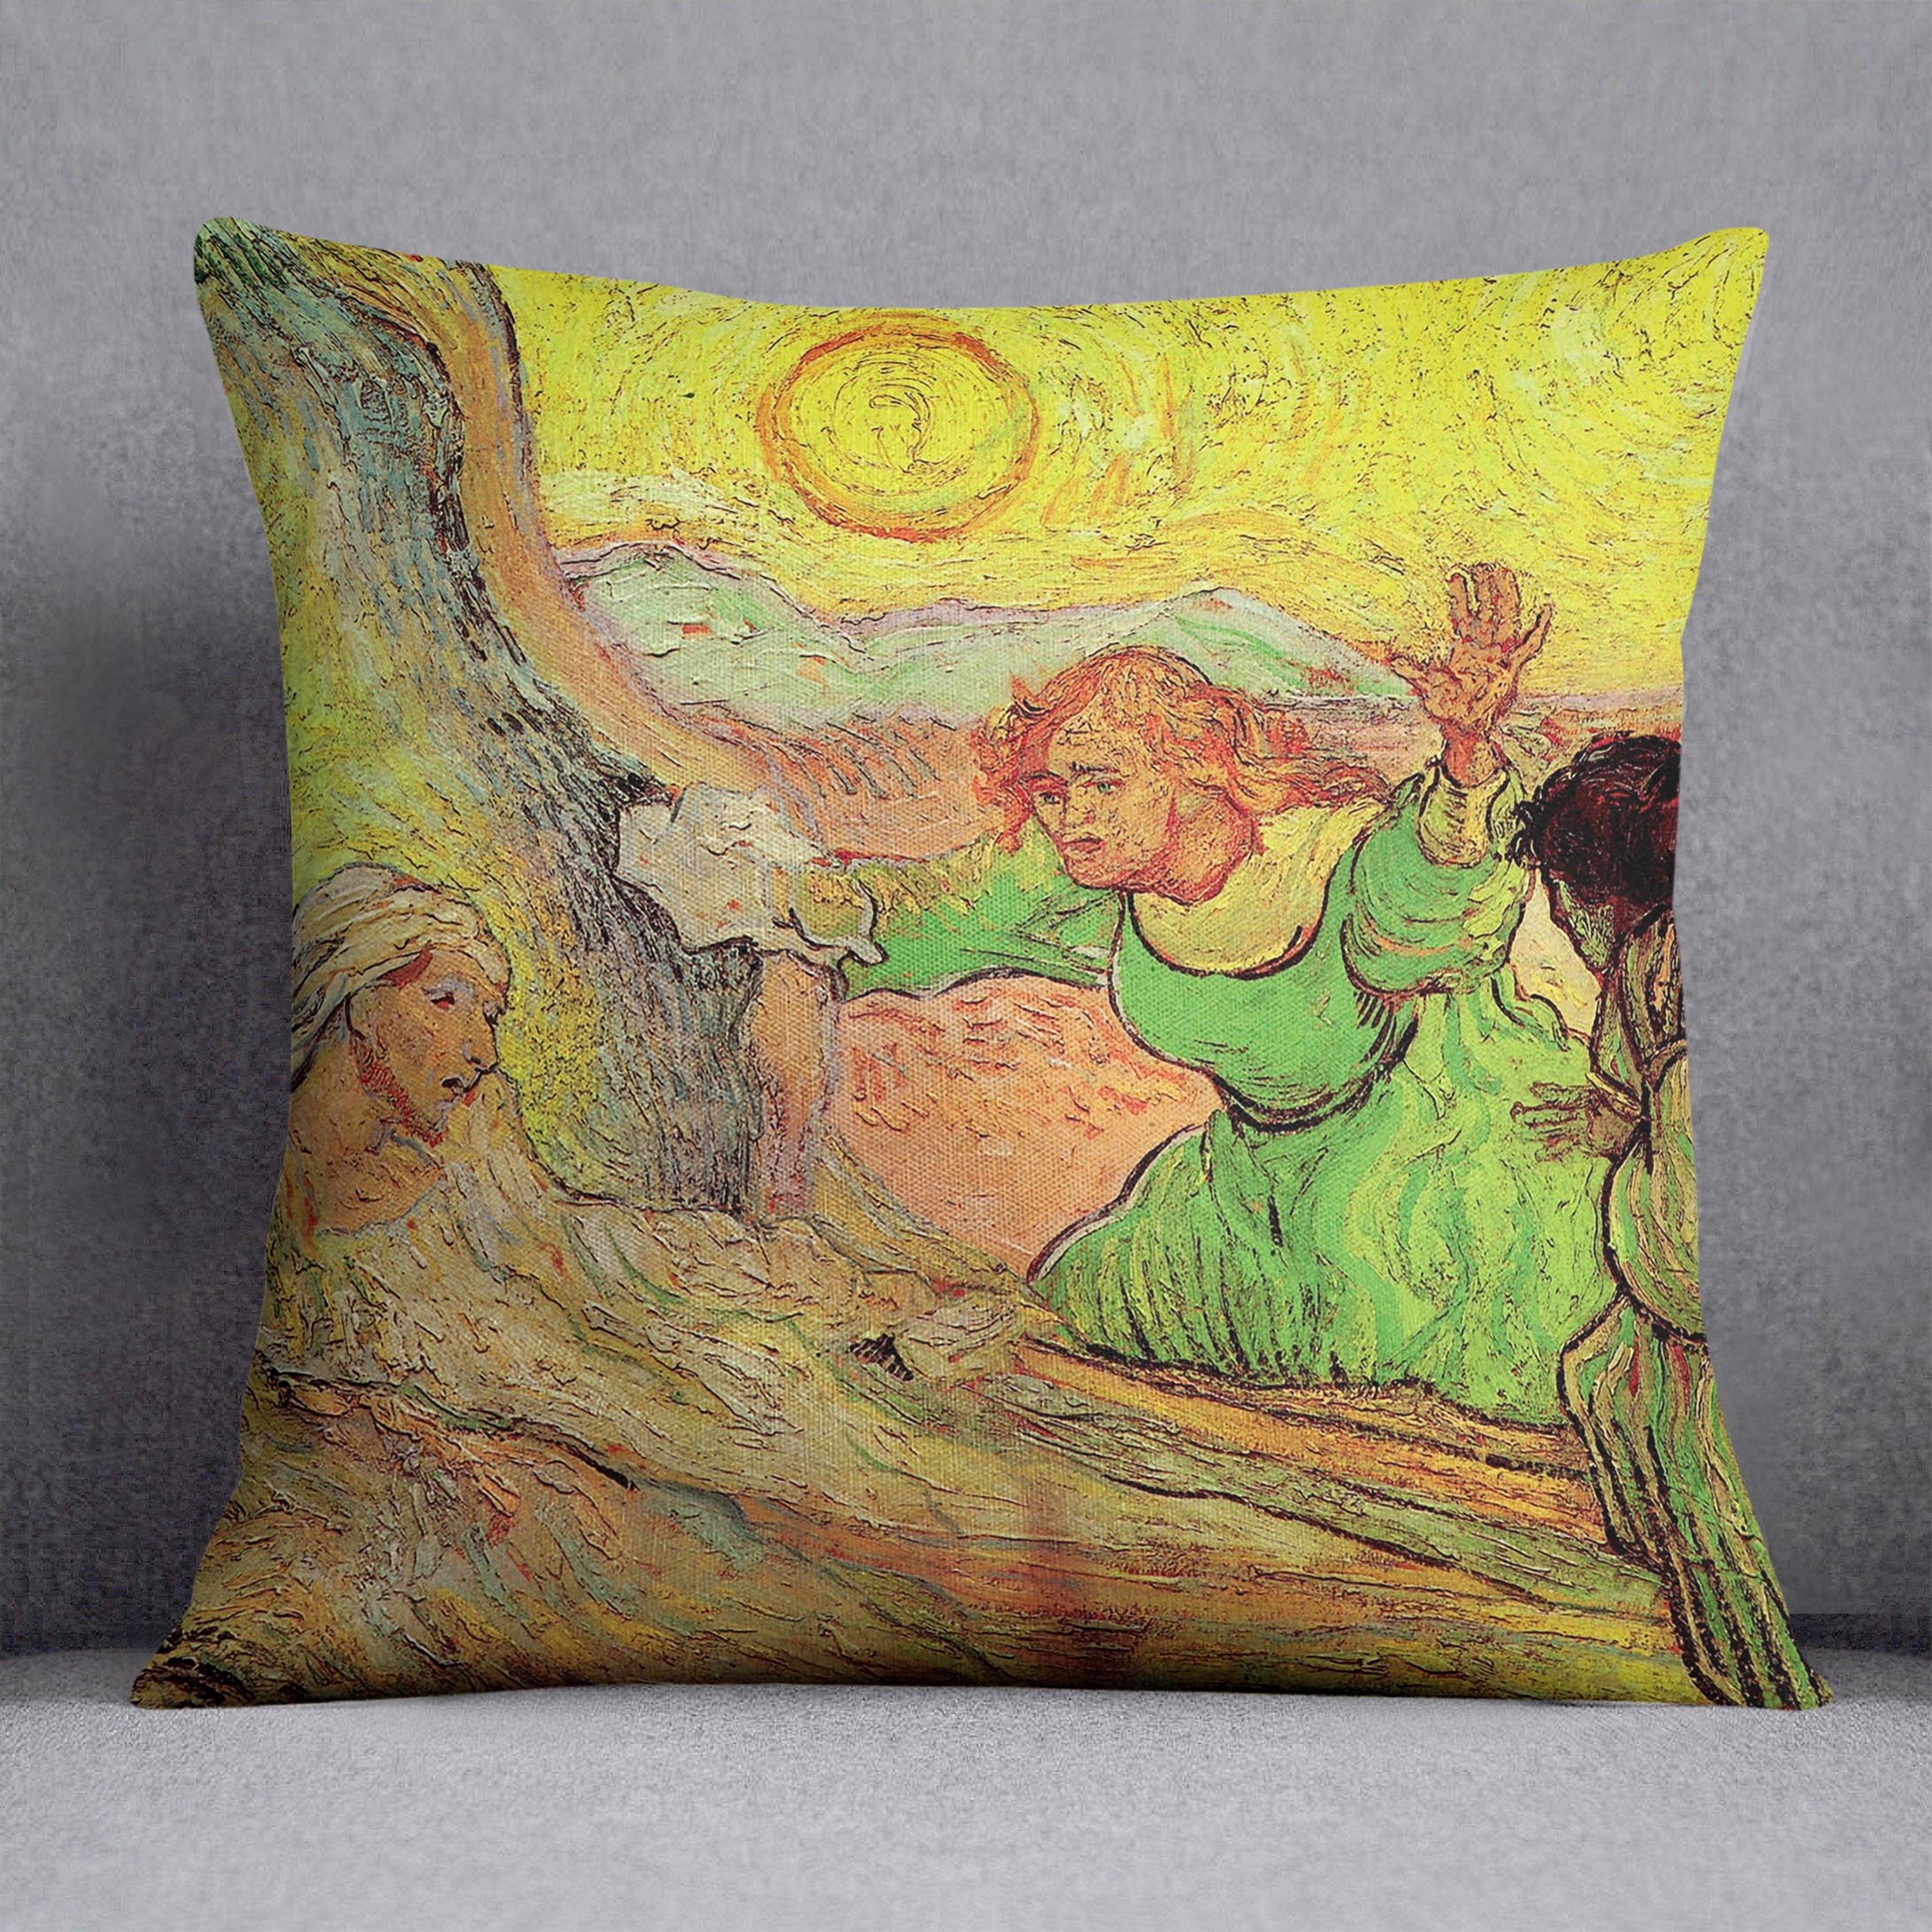 The Raising of Lazarus after Rembrandt by Van Gogh Cushion